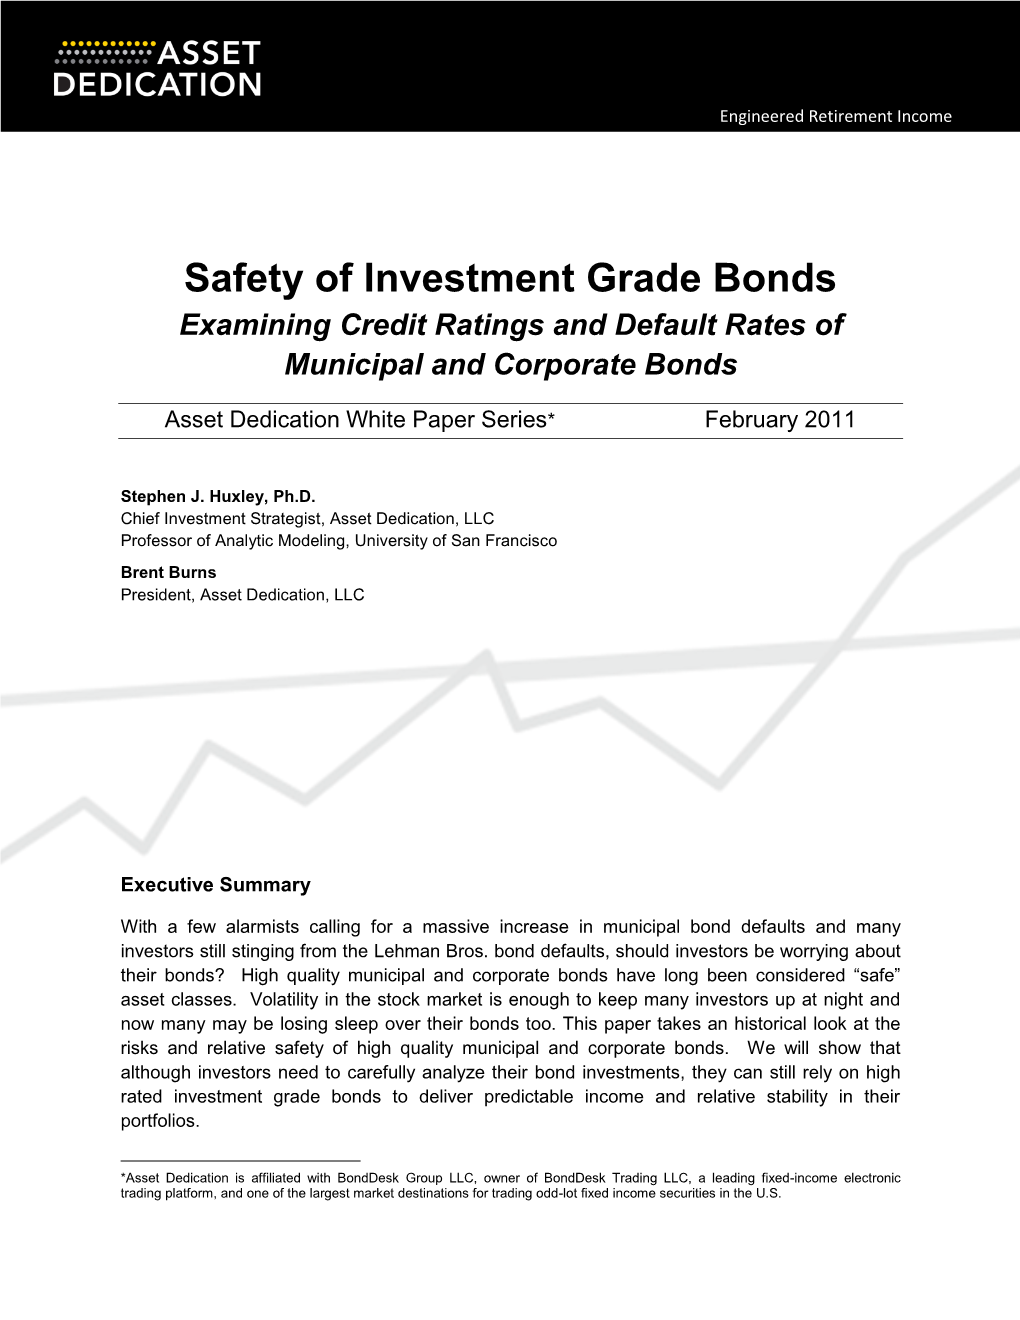 Safety of Investment Grade Bonds Examining Credit Ratings and Default Rates of Municipal and Corporate Bonds